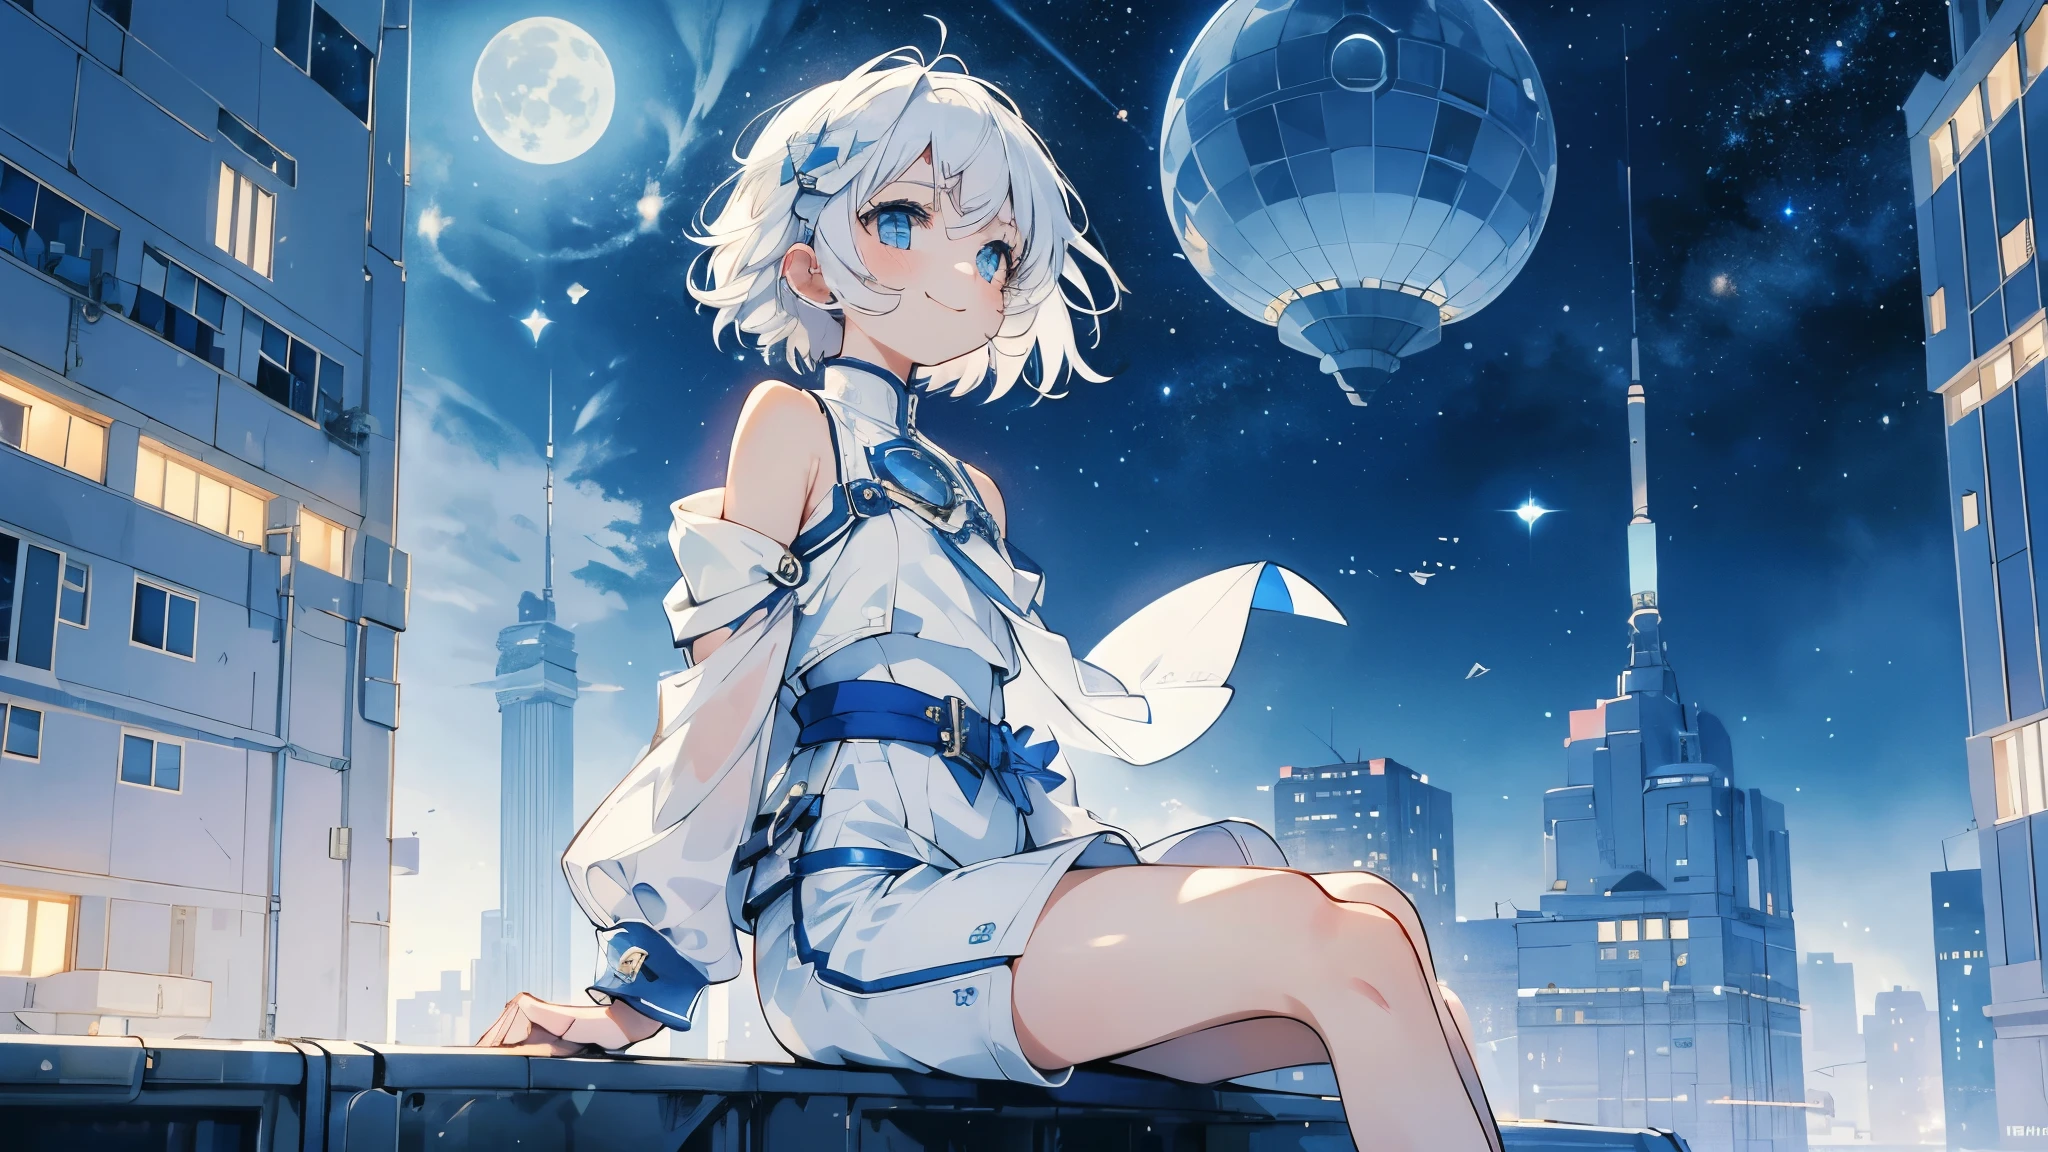 night,Starry Sky,Big full moon,girl１people,Futuristic buildings,Flying Airship,Rooftop、A gentle wind blows,Sitting,Looking up at the sky,Short Hair,White hair color,Blue Mesh,Blue Eyes,13 years old,アジアpeople,smile,Primary school students,Sunburned skin,Being thin,White skin,White shorts,White tank top,White jacket,Low - Angle,